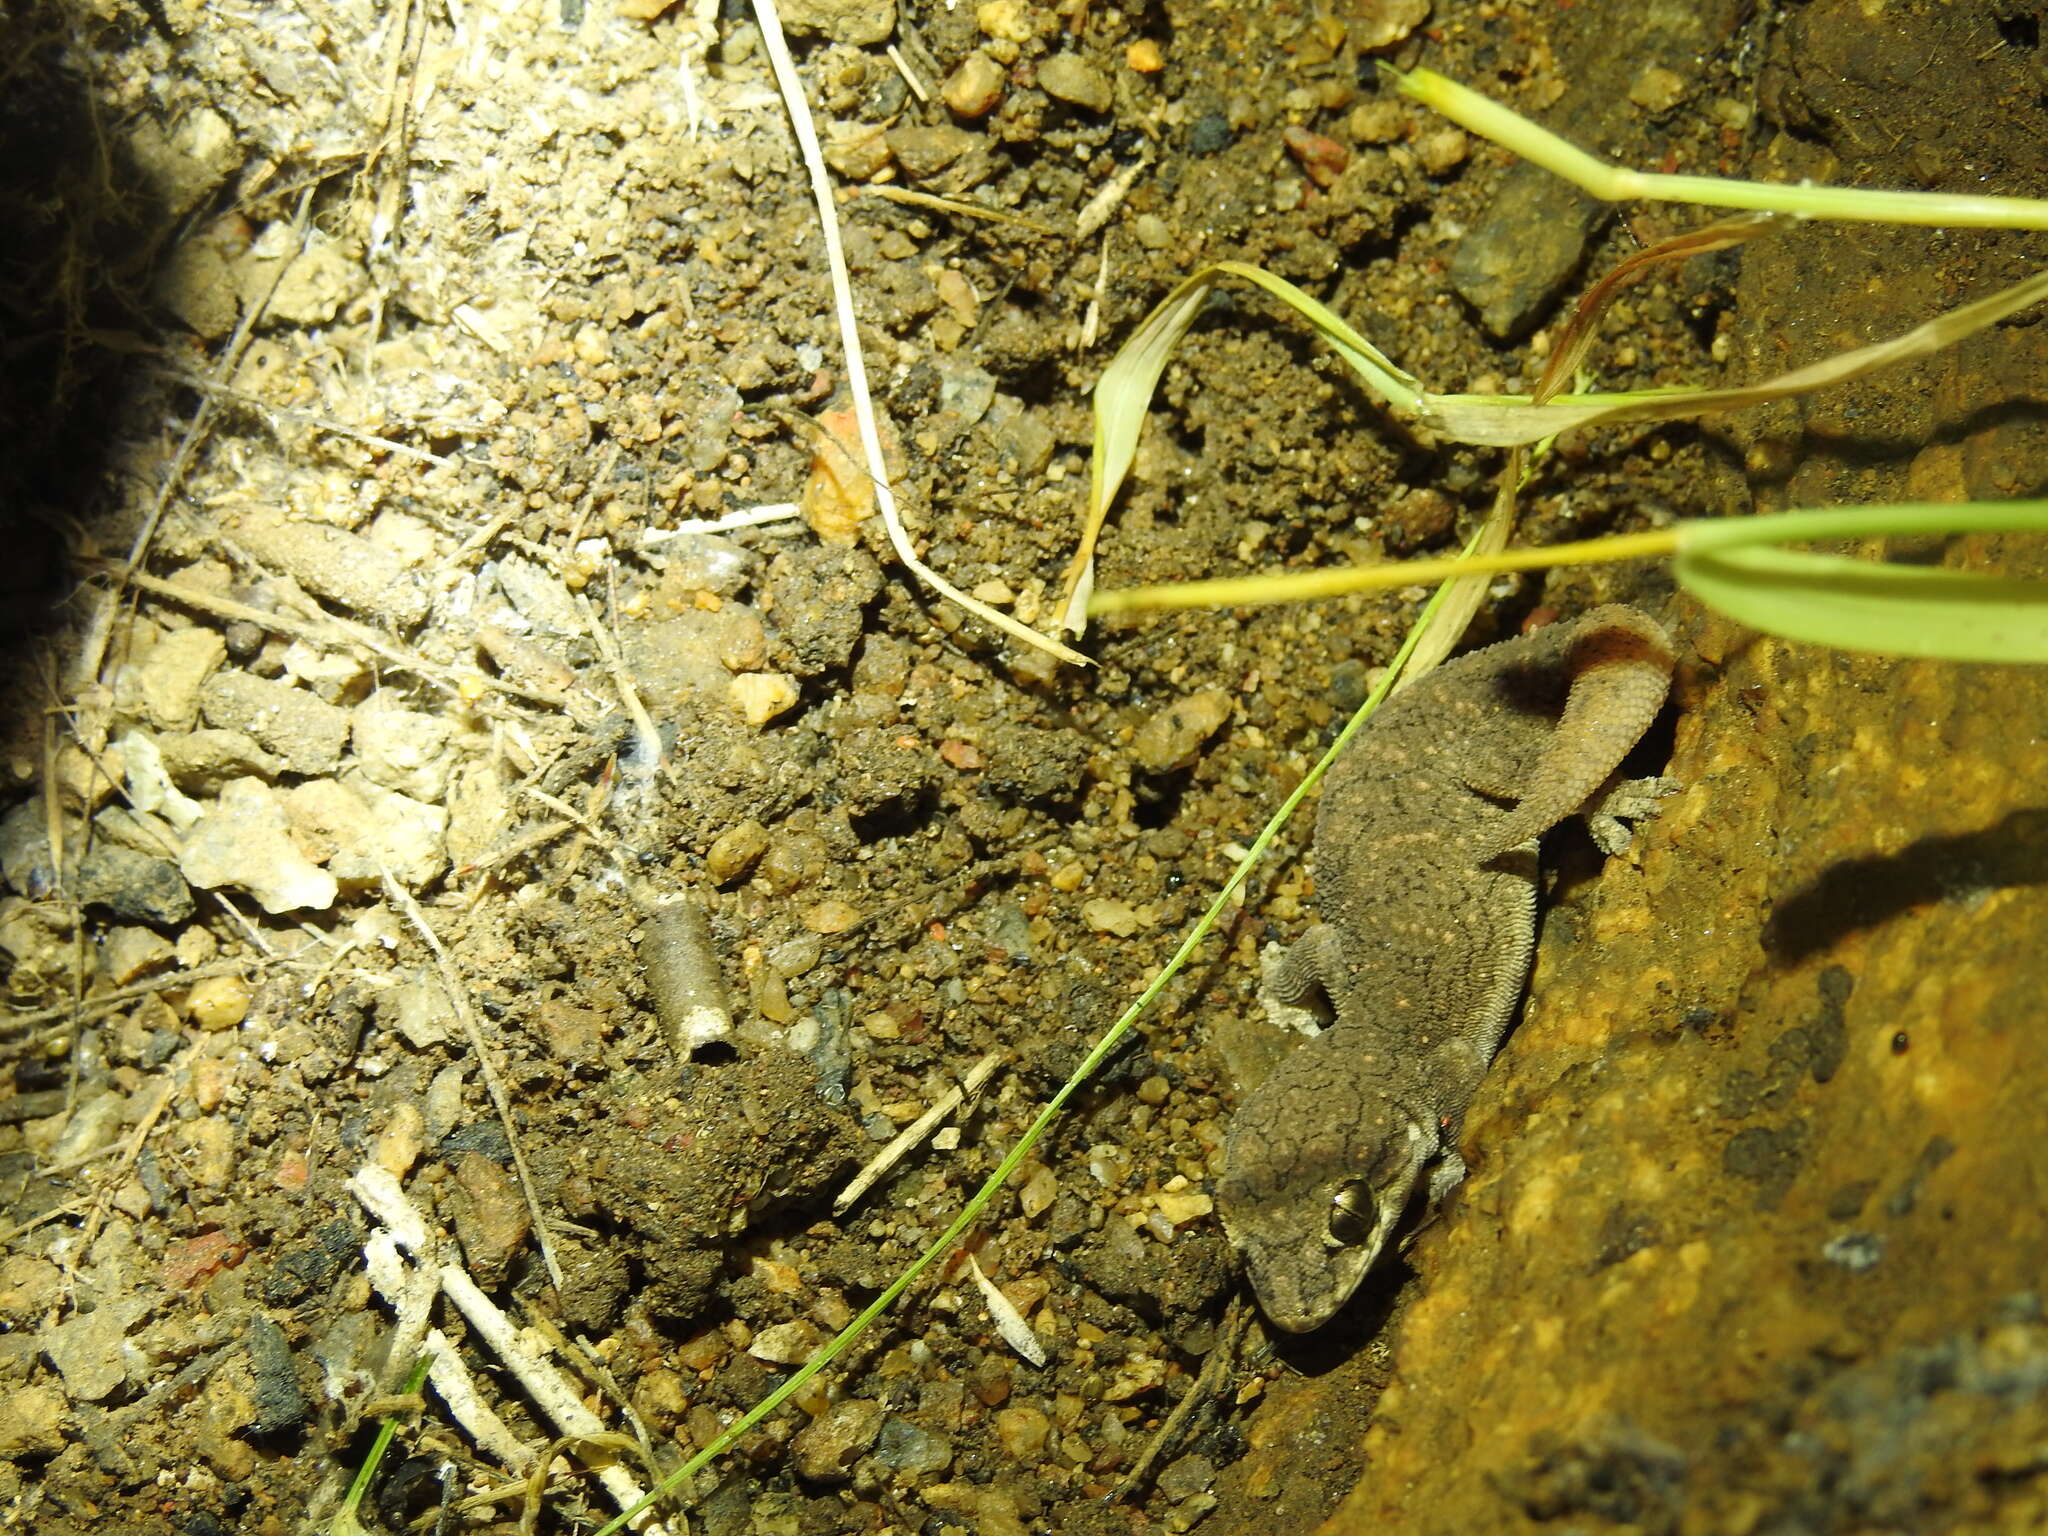 Image of Reticulate Leaf-toed Gecko